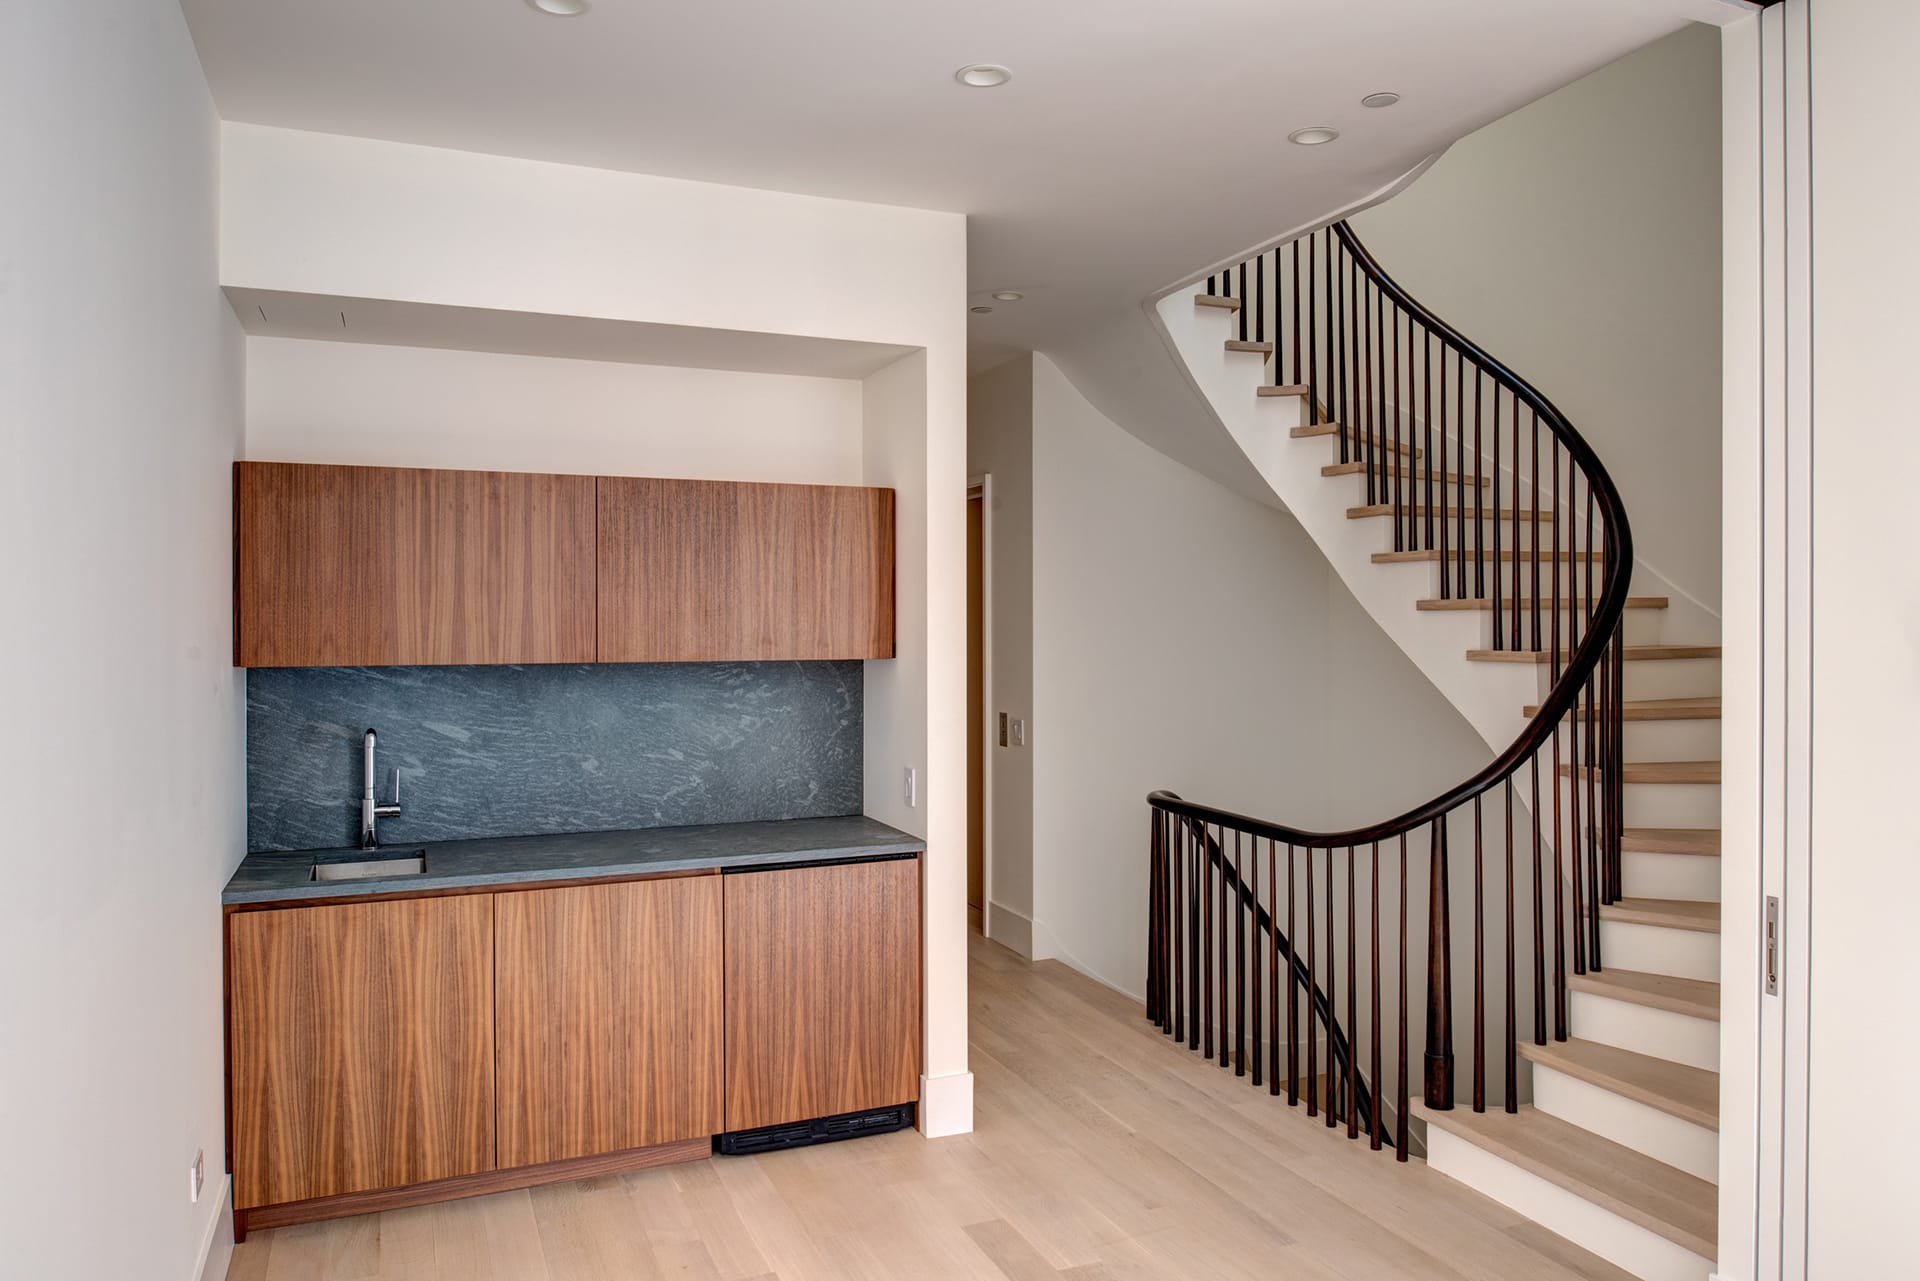 White oak and mahogany staircase and built-in wet bar in an Upper West Side Passive House.